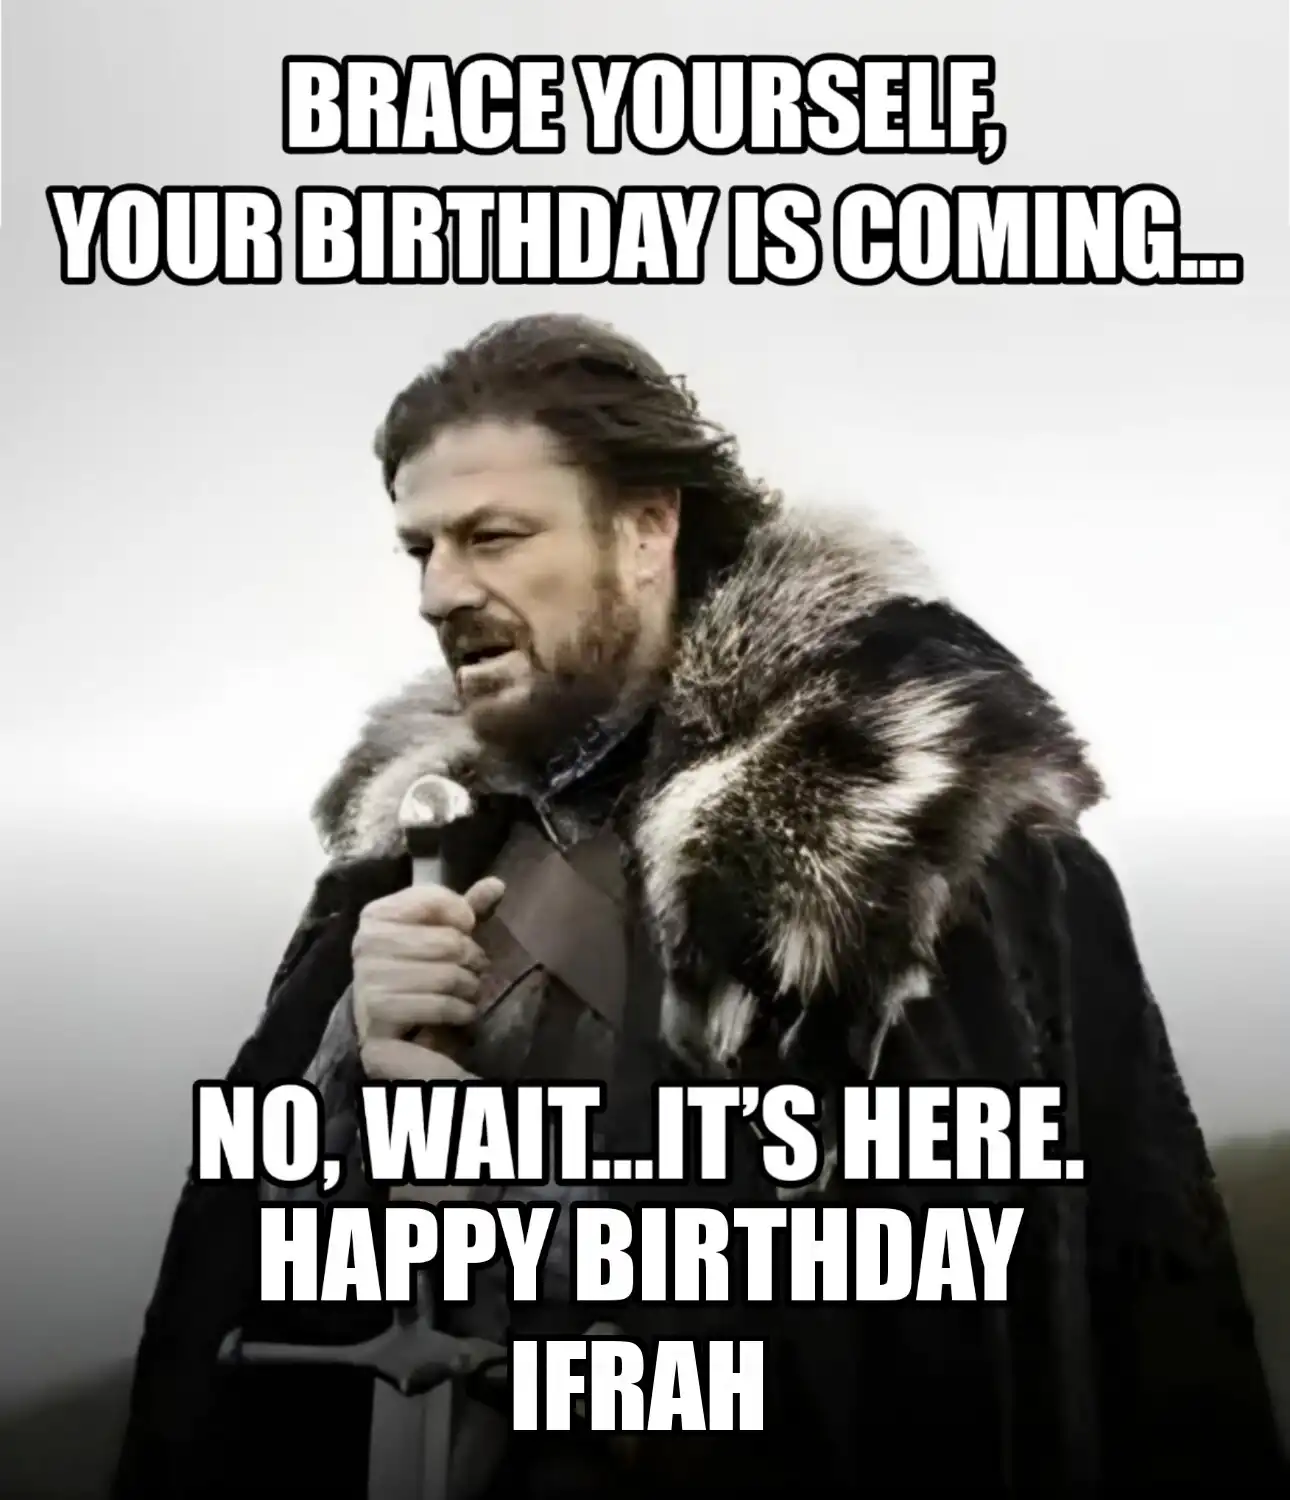 Happy Birthday Ifrah Brace Yourself Your Birthday Is Coming Meme